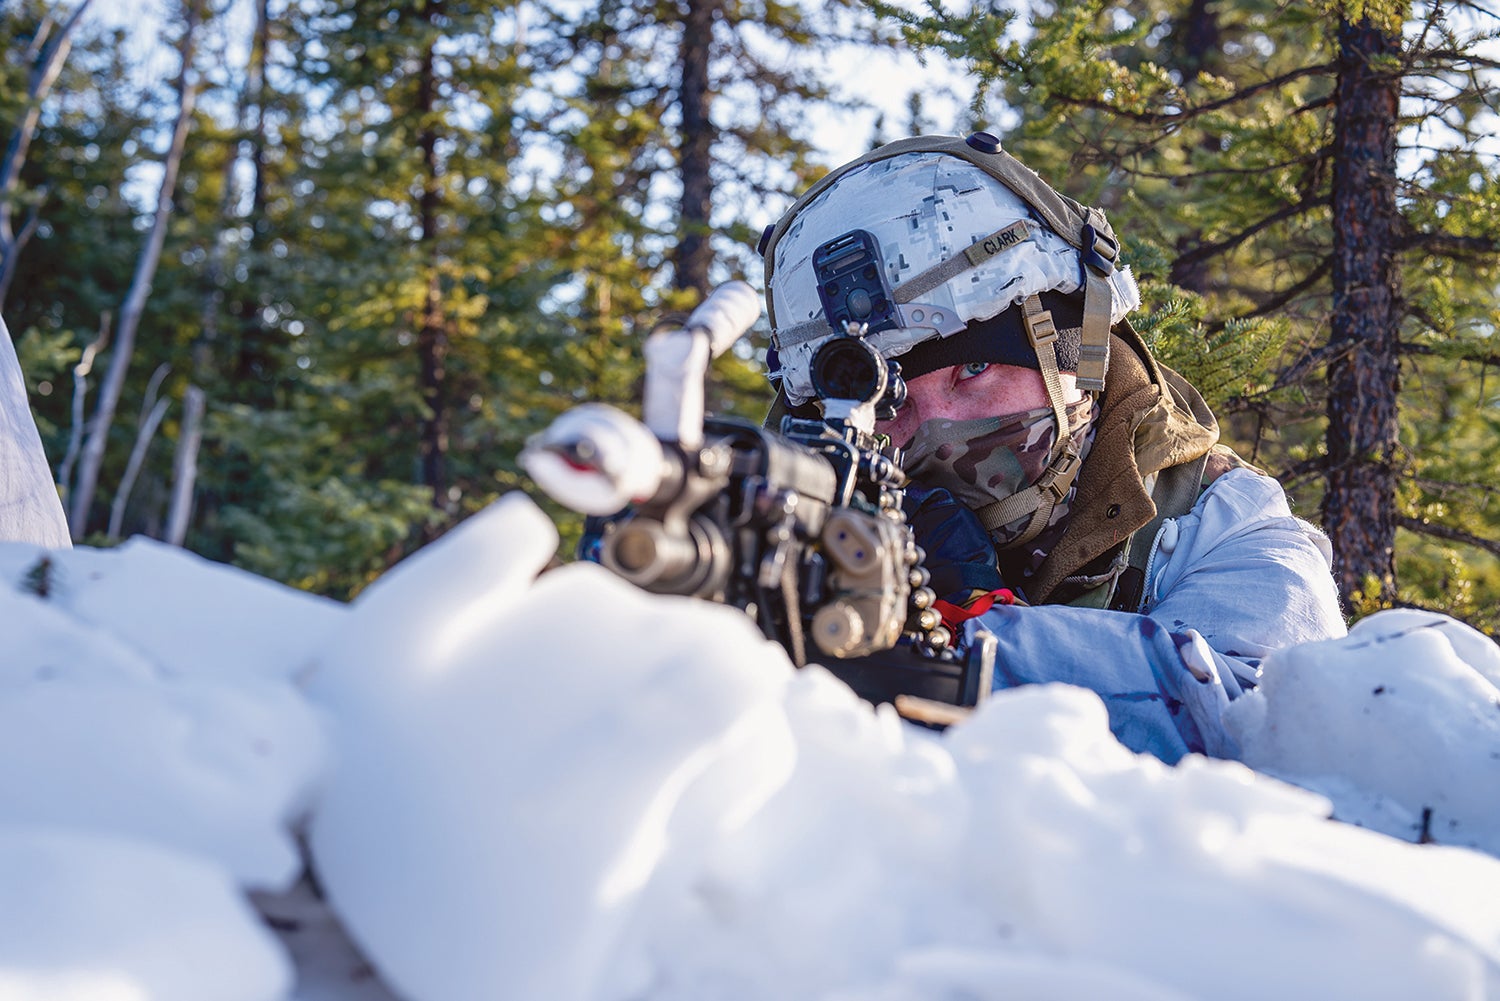 A soldier with the 2nd Infantry Brigade Combat Team (Airborne), 11th Airborne Division, takes aim during training at Donnelly Training Area, Alaska. (Credit: U.S. Army/Pfc. Mike Godinez-Martinez)